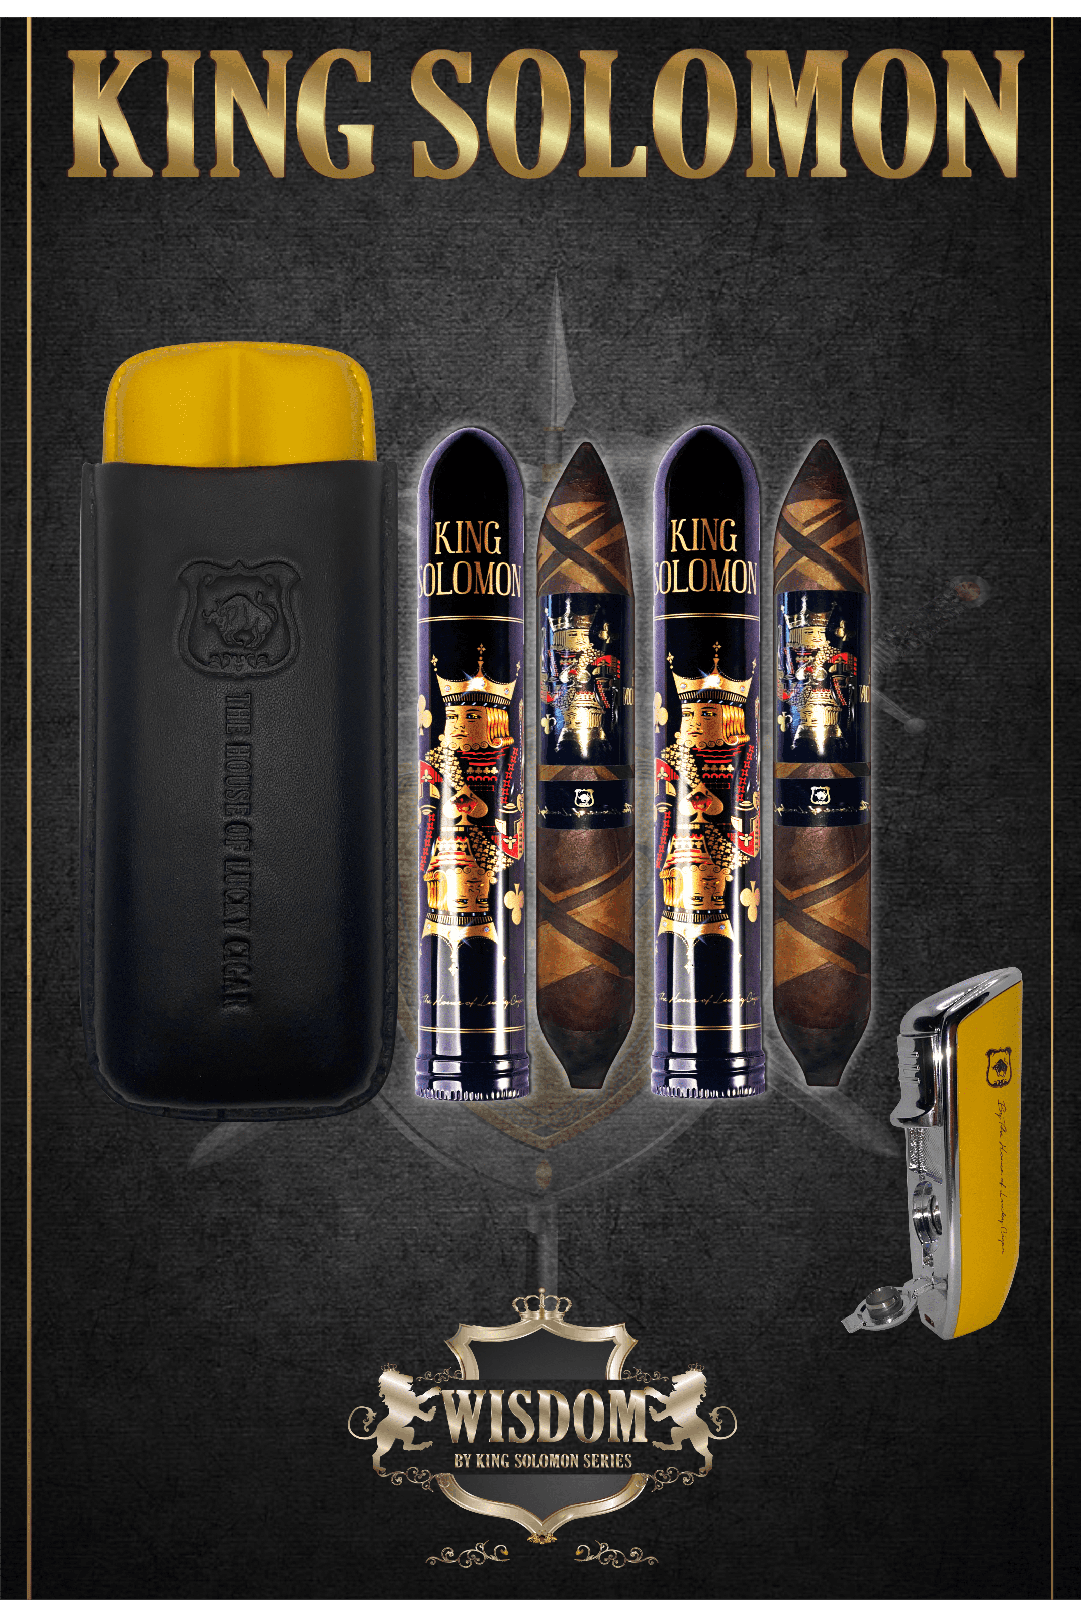 From The King Solomon Series: Set 2 Solomon 7x60 Cigars with Travel Humidor and Torch Lighter